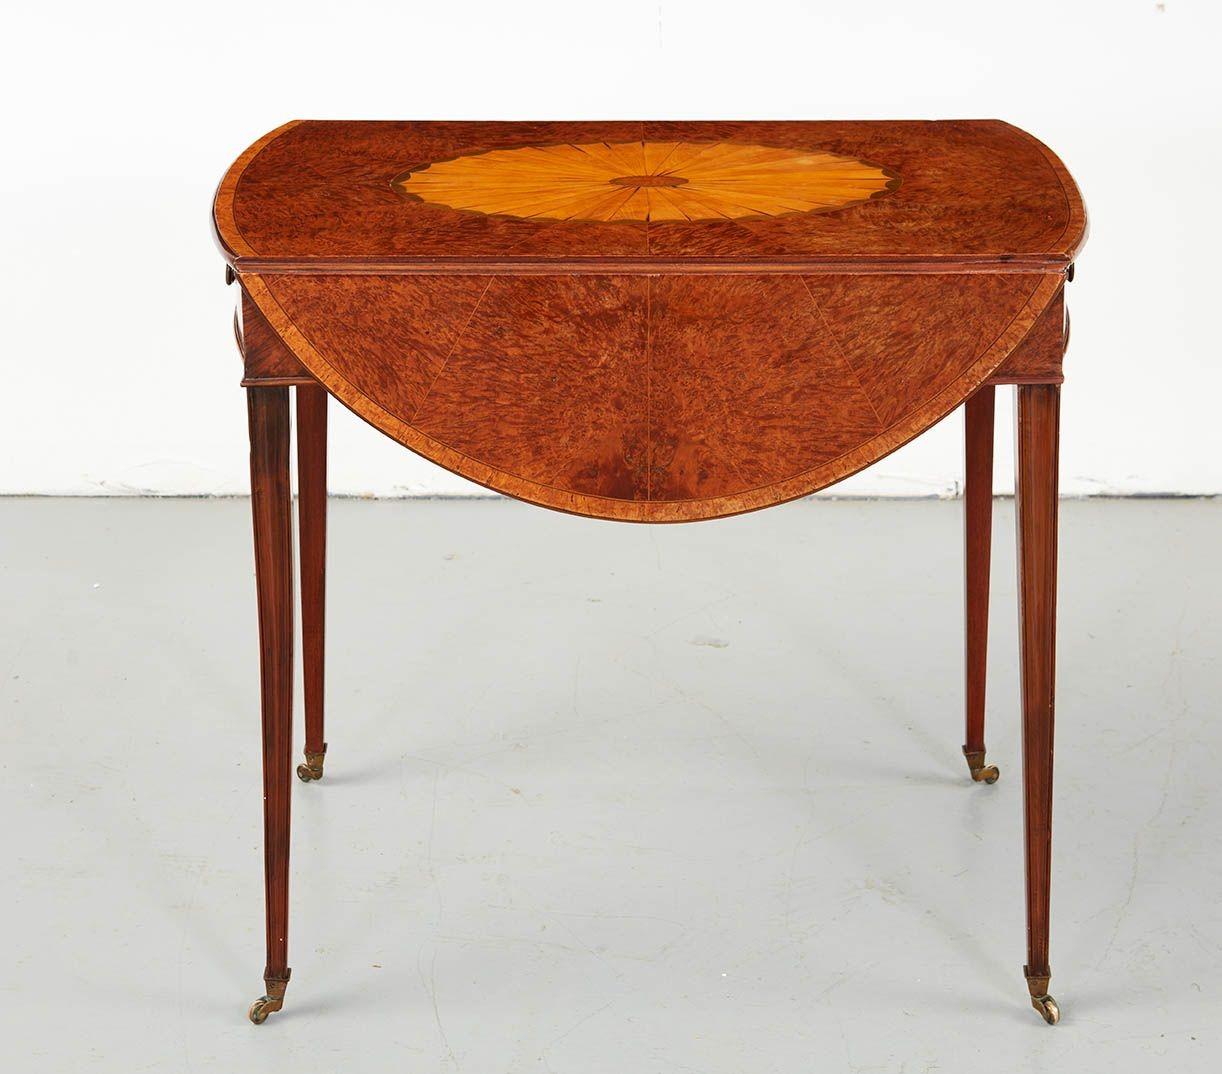 Very fine George III burr Yewwood Pembroke table, the oval top with central satinwood and harewood patera, on book-matched, segmented burr yew ground with satinwood banded edgel over single drawer retaining original brass pull and standing on molded